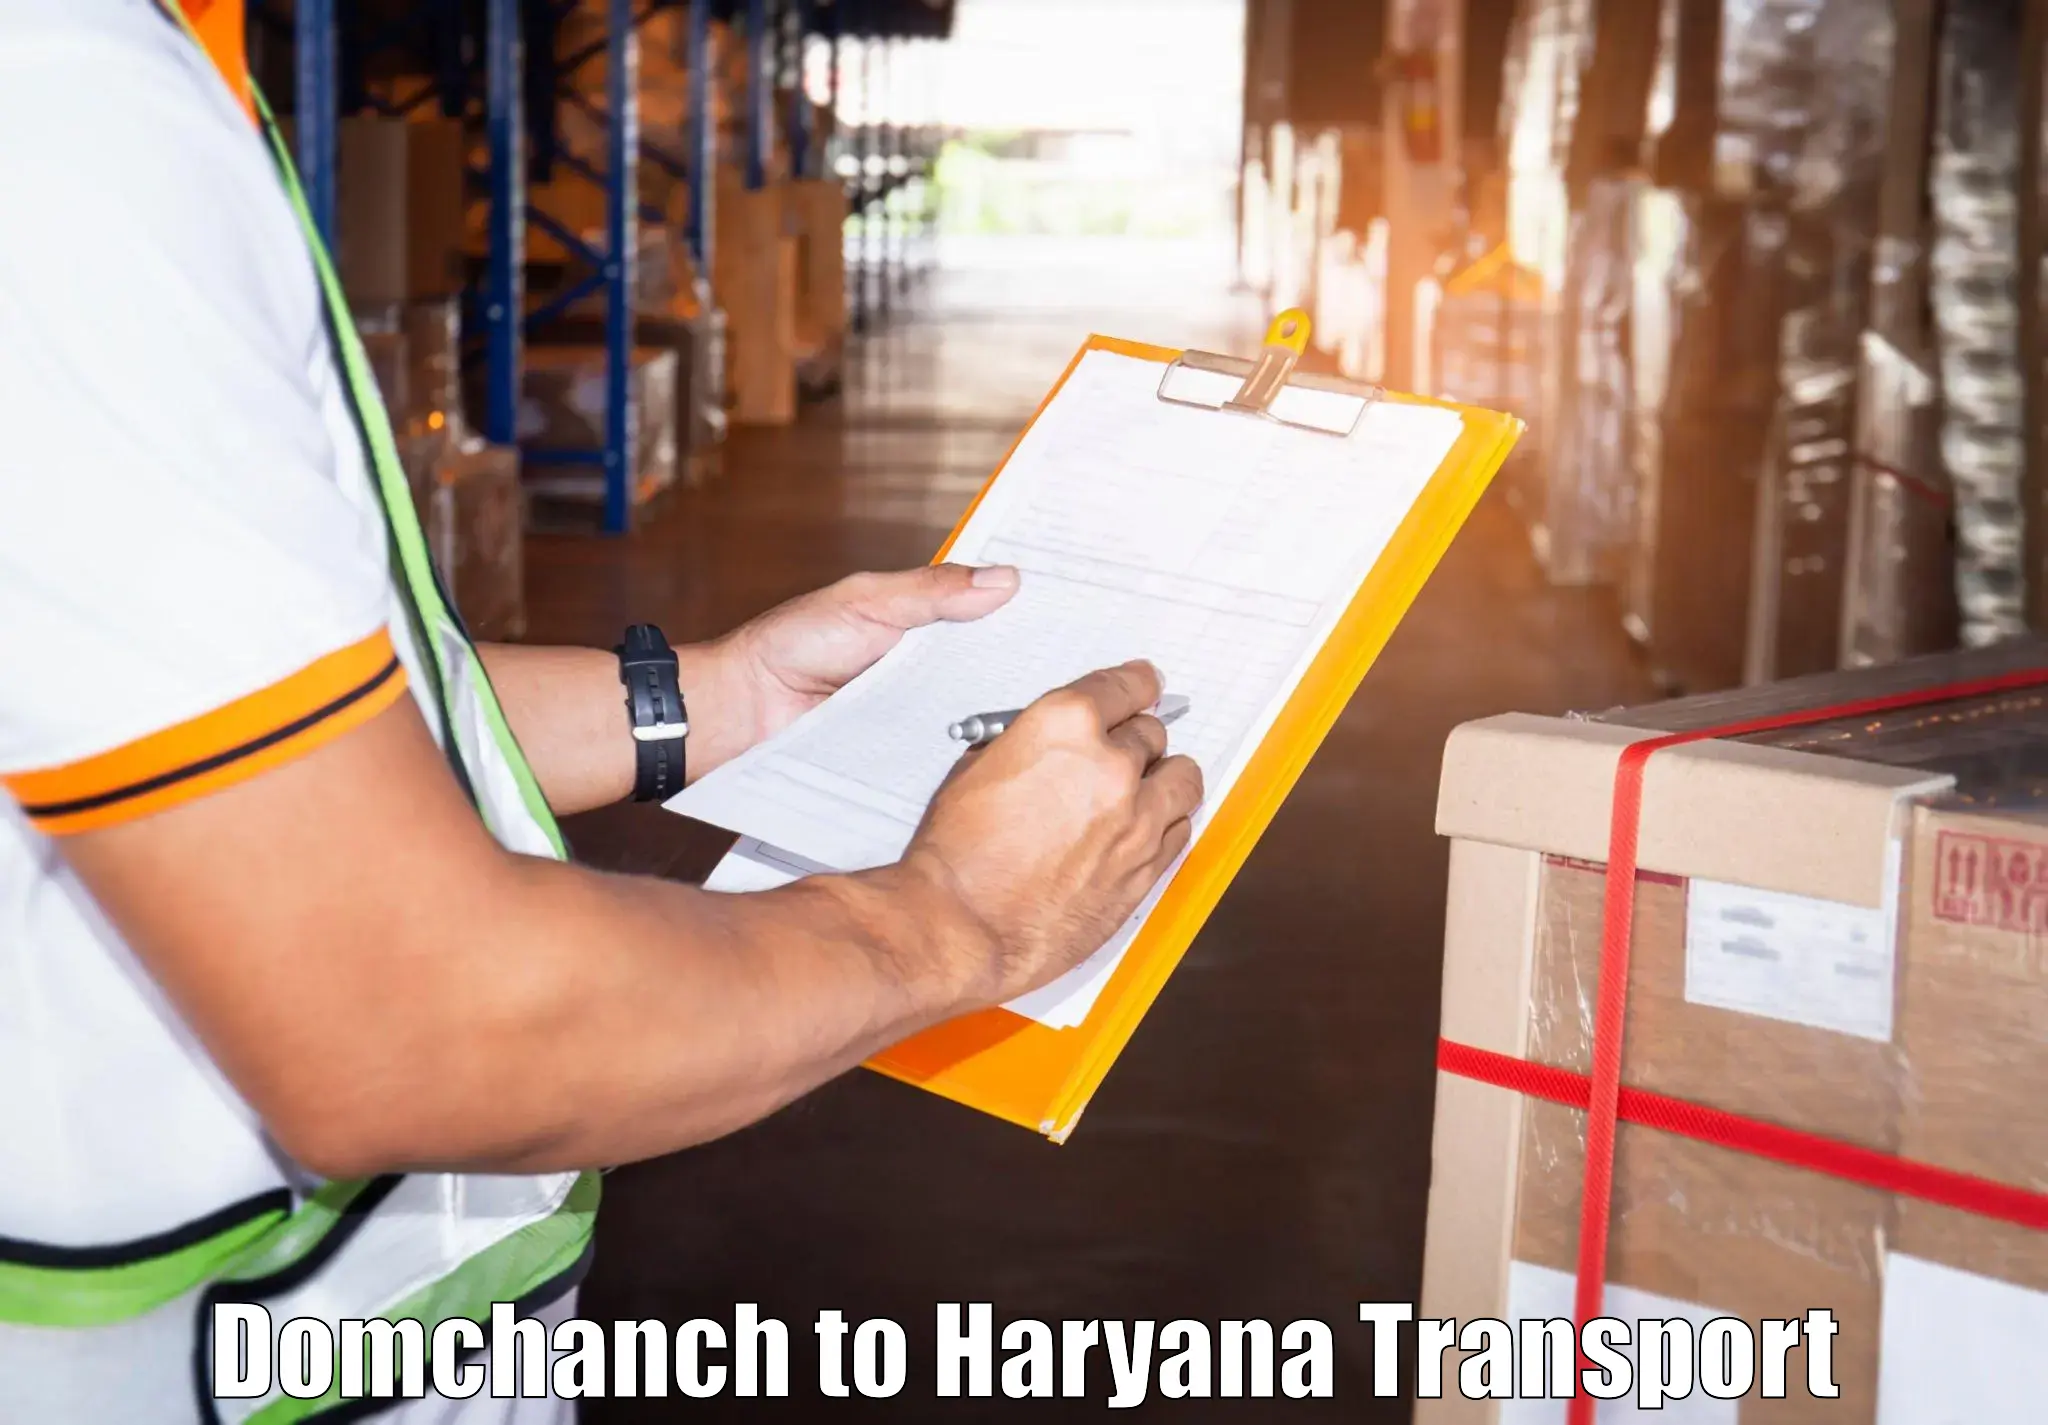 Domestic goods transportation services in Domchanch to Hansi